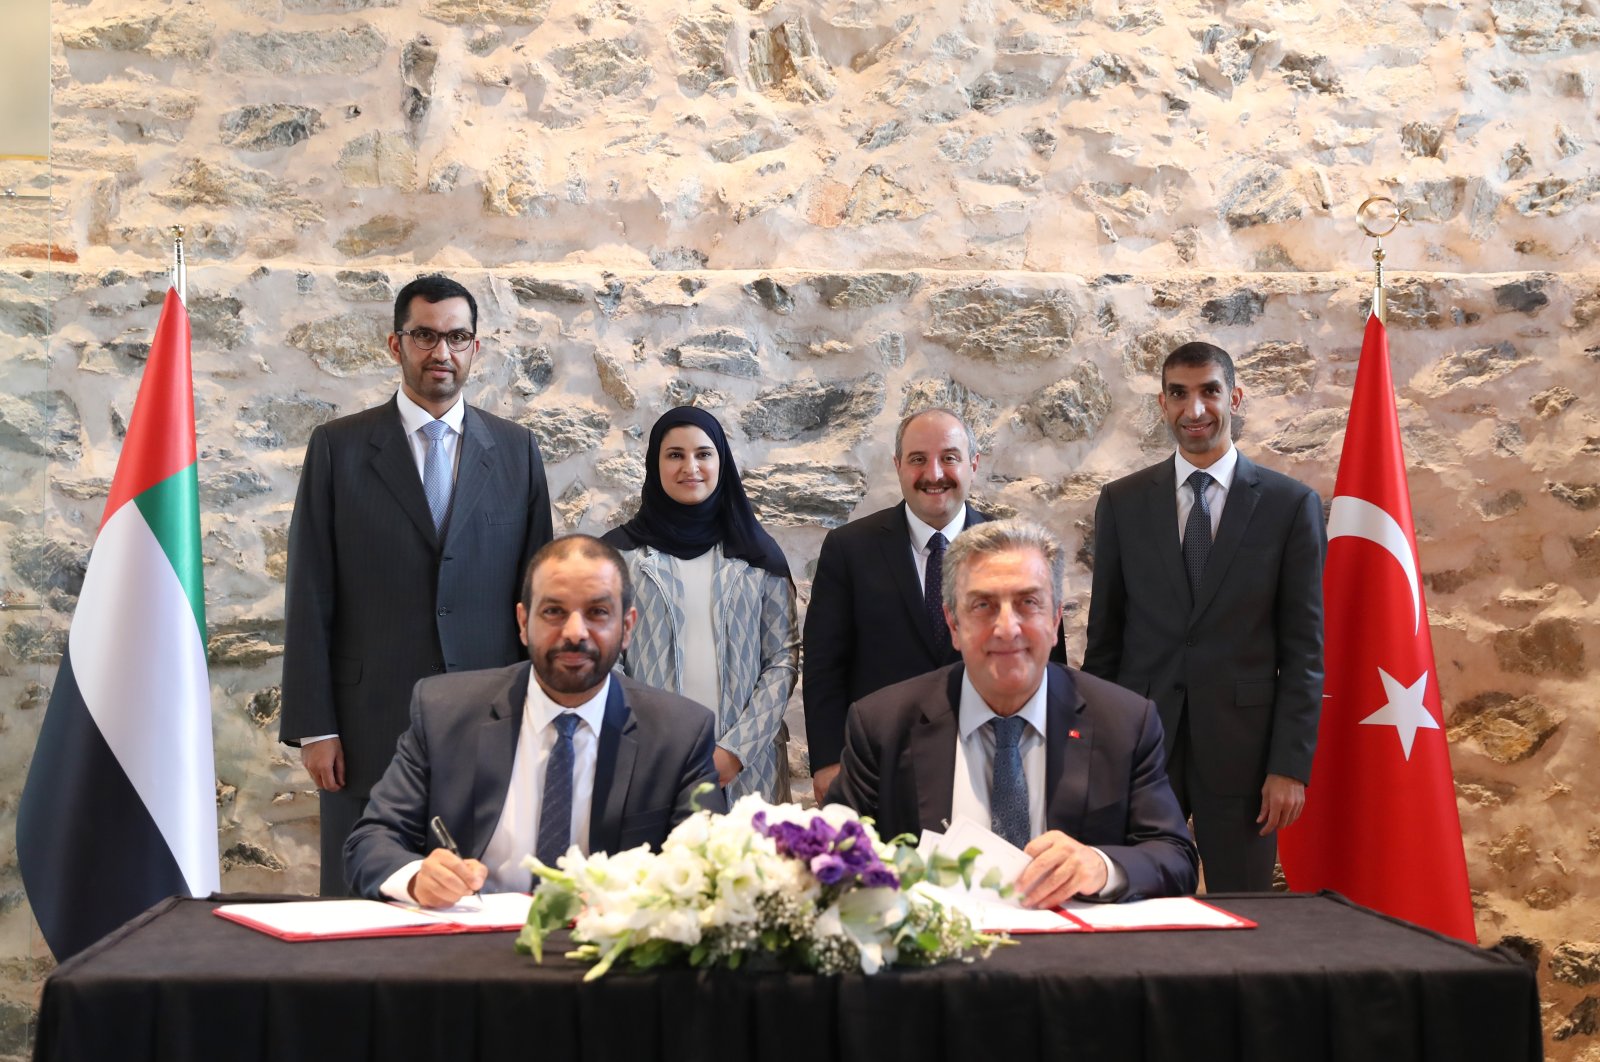 Turkish and UAE officials during the signing ceremony of the cooperation agreement between the Turkish Space Agency and the United Arab Emirates Space Agency in Istanbul, Turkey, July 13, 2022. (Courtesy of Industry and Technology Ministry)